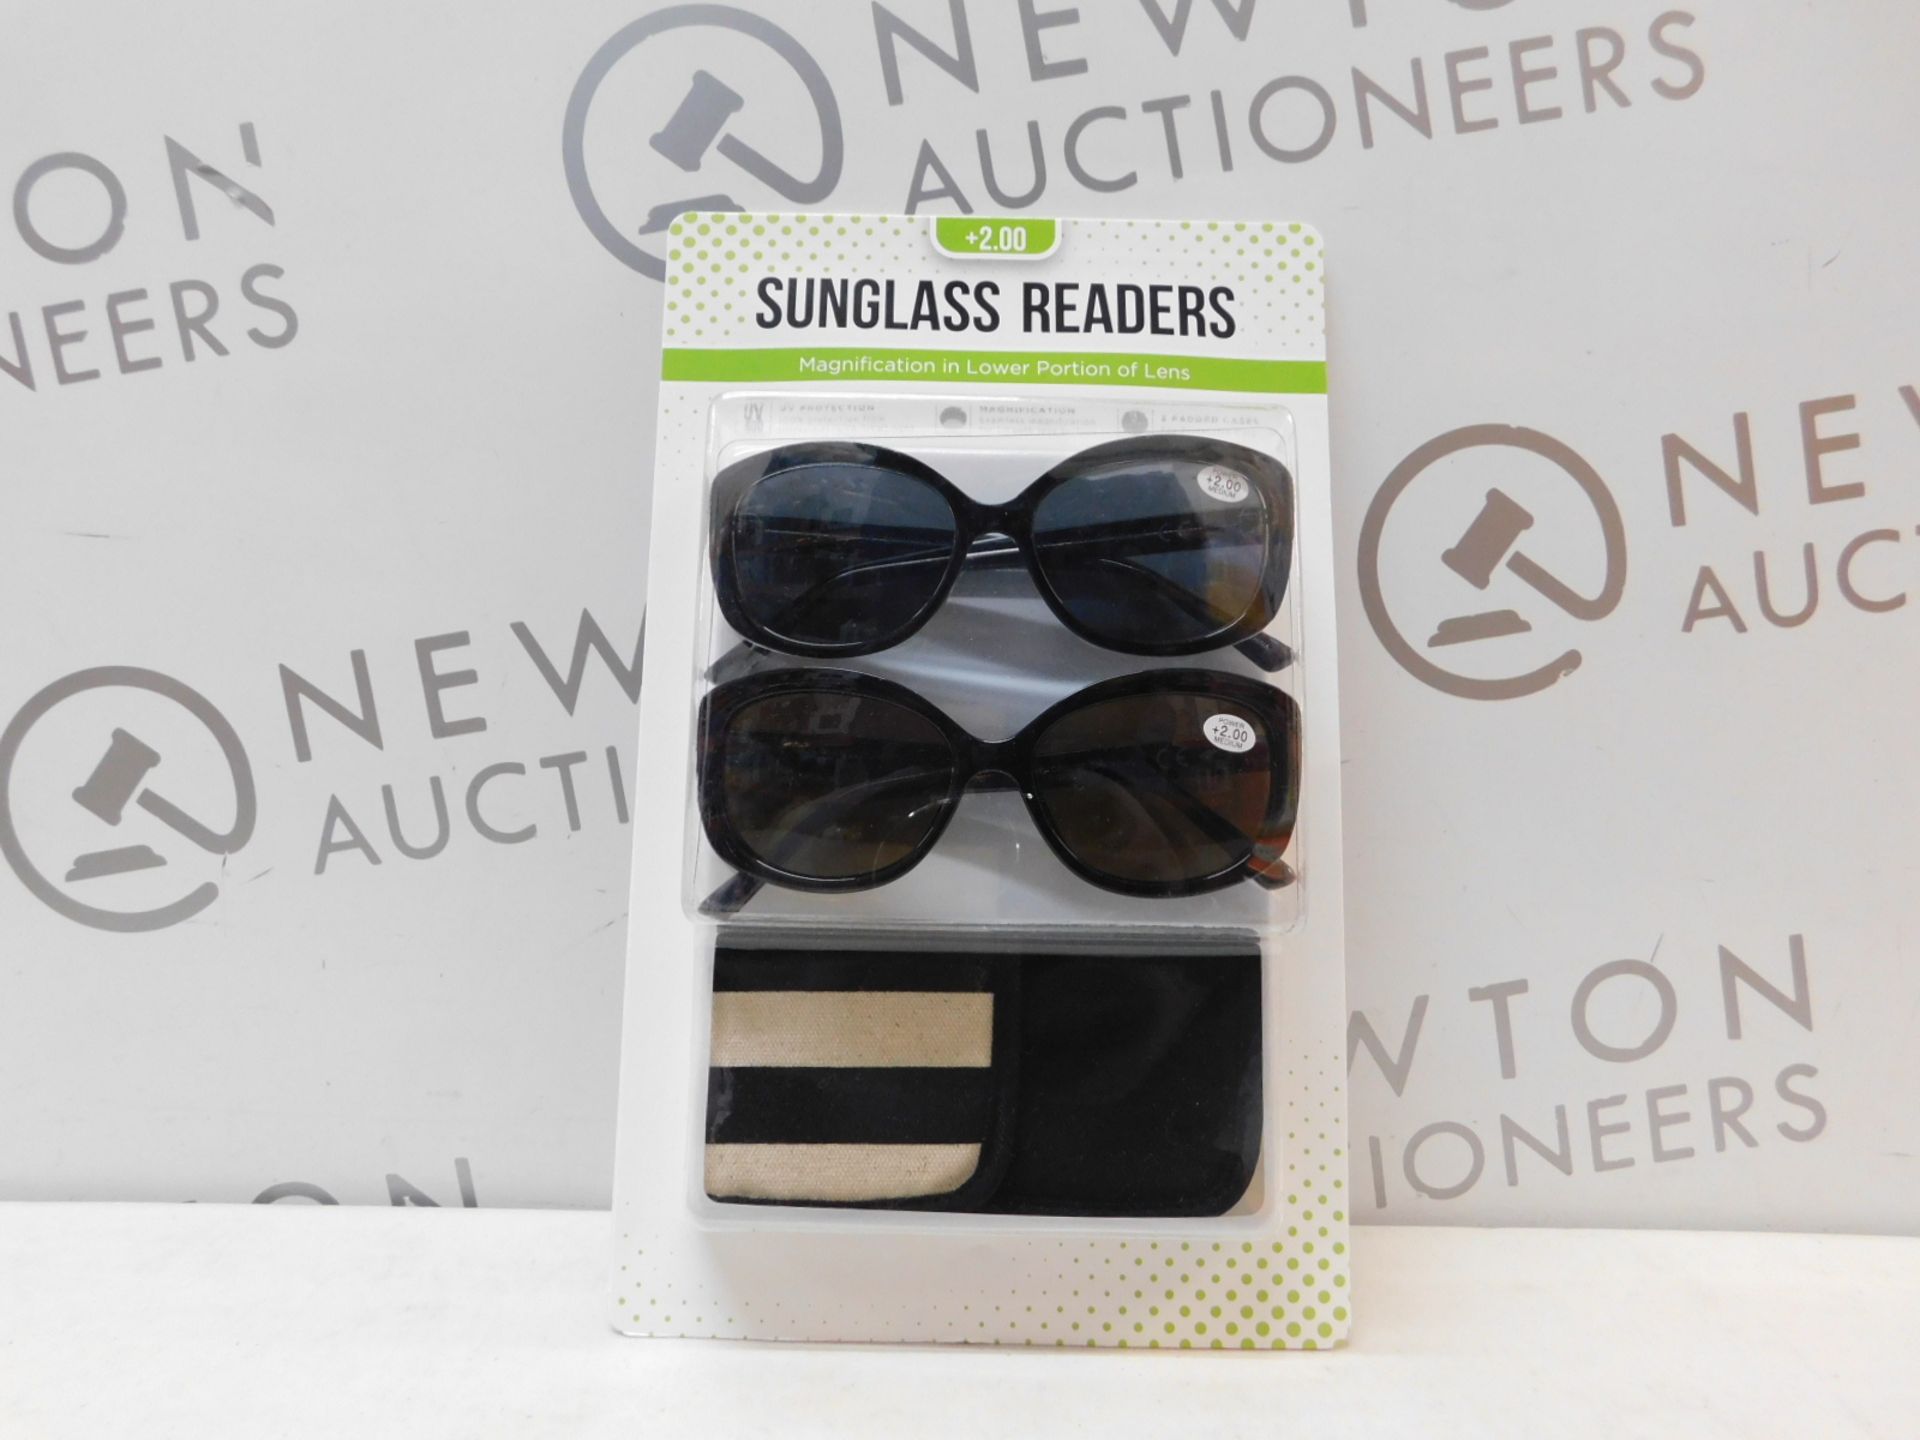 1 BRAND NEW PACK OF SUNGLASS READERS IN +2.00 STRENGTH RRP Â£19.99